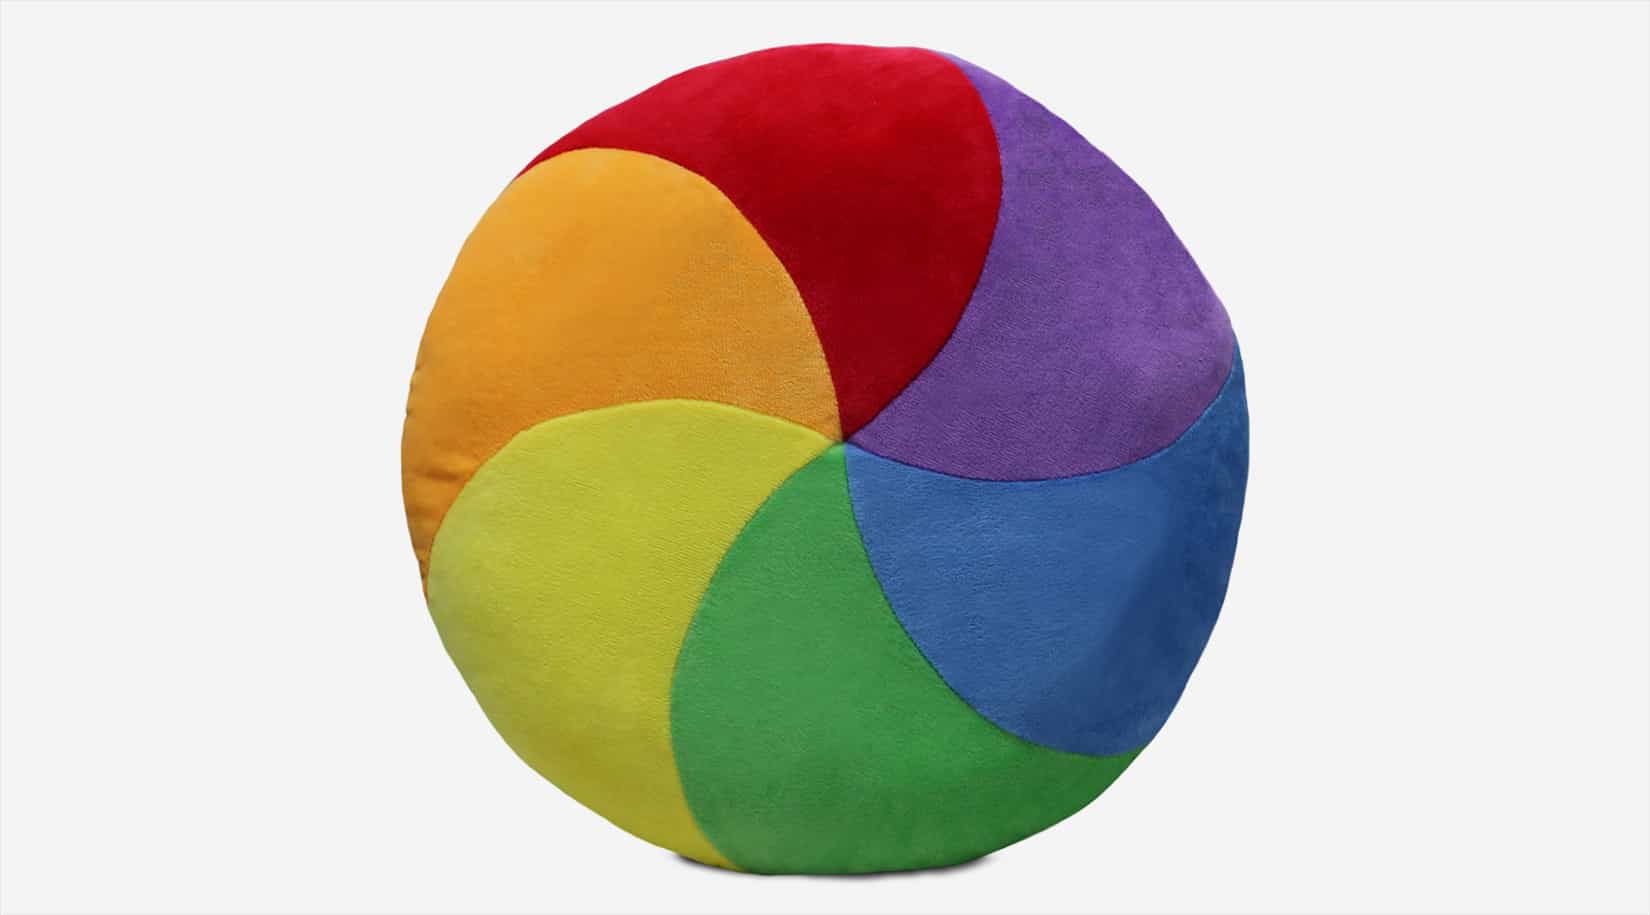 Mac's spinning wheel icon also makes an attractive throw pillow